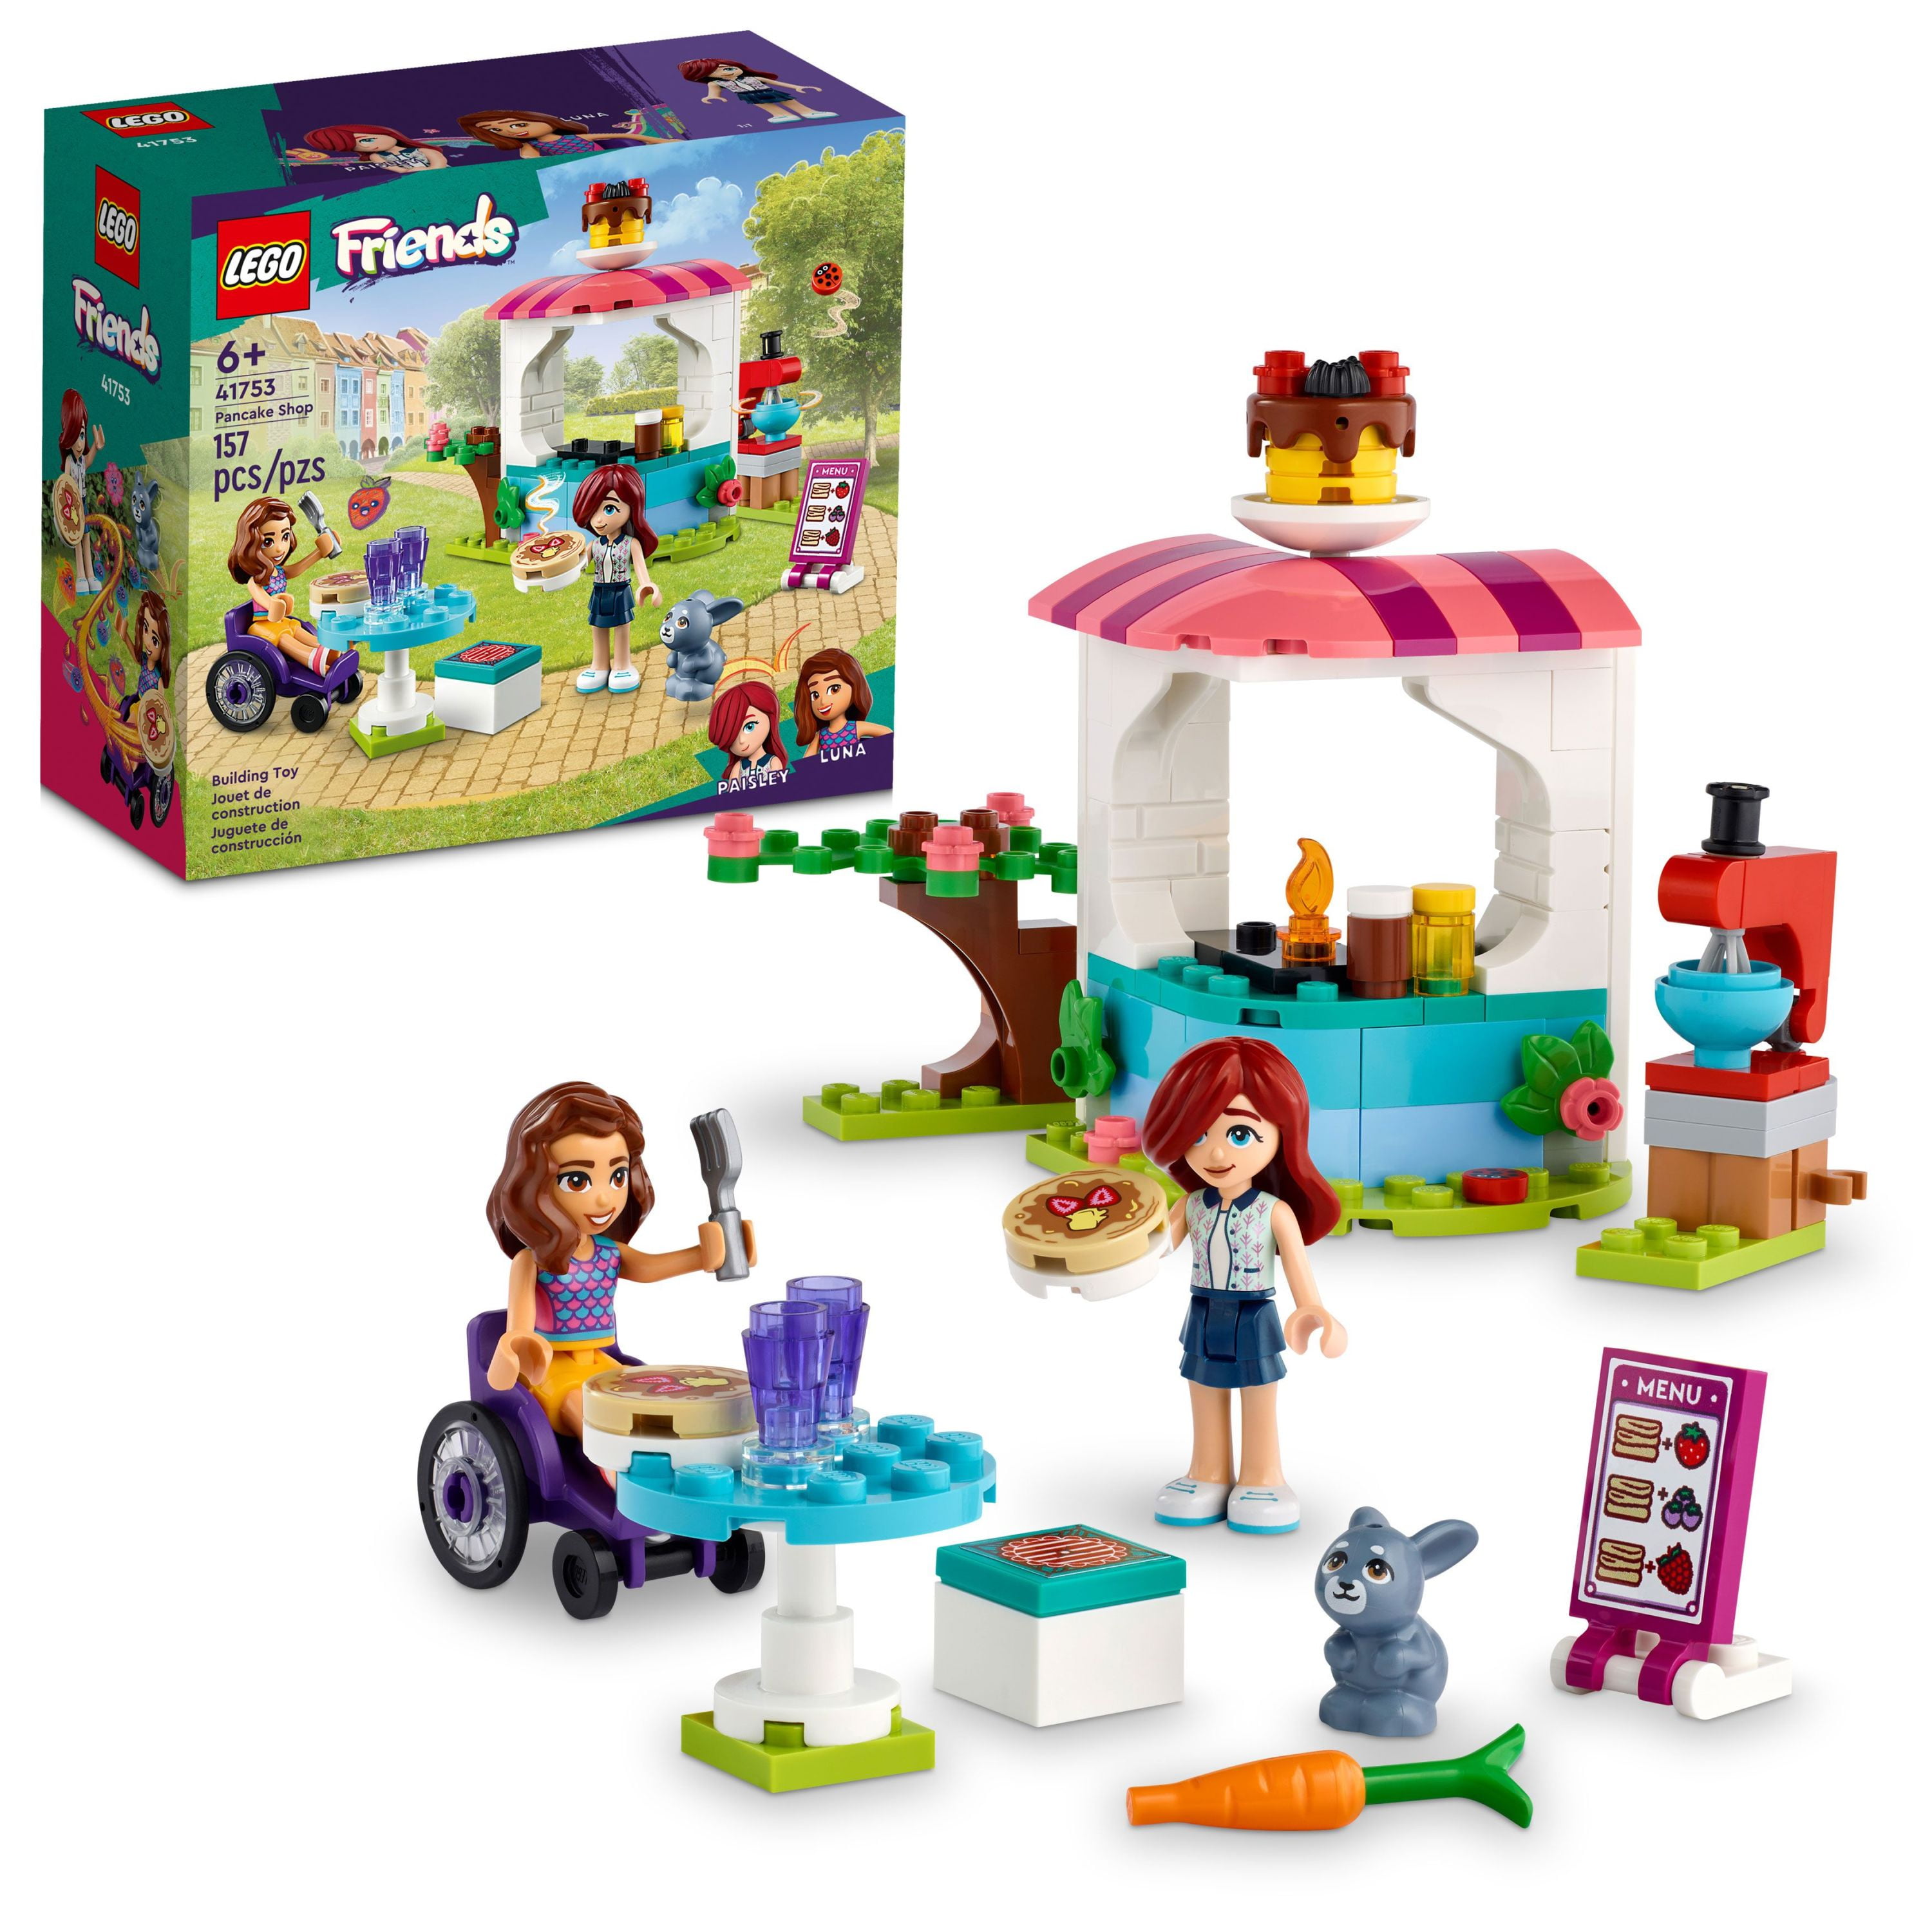 LEGO Friends Pancake Shop 41753 Building Toy Set, Pretend Creative Fun for  Boys and Girls Ages 6+, With 2 Mini-Dolls and Accessories, Inspire